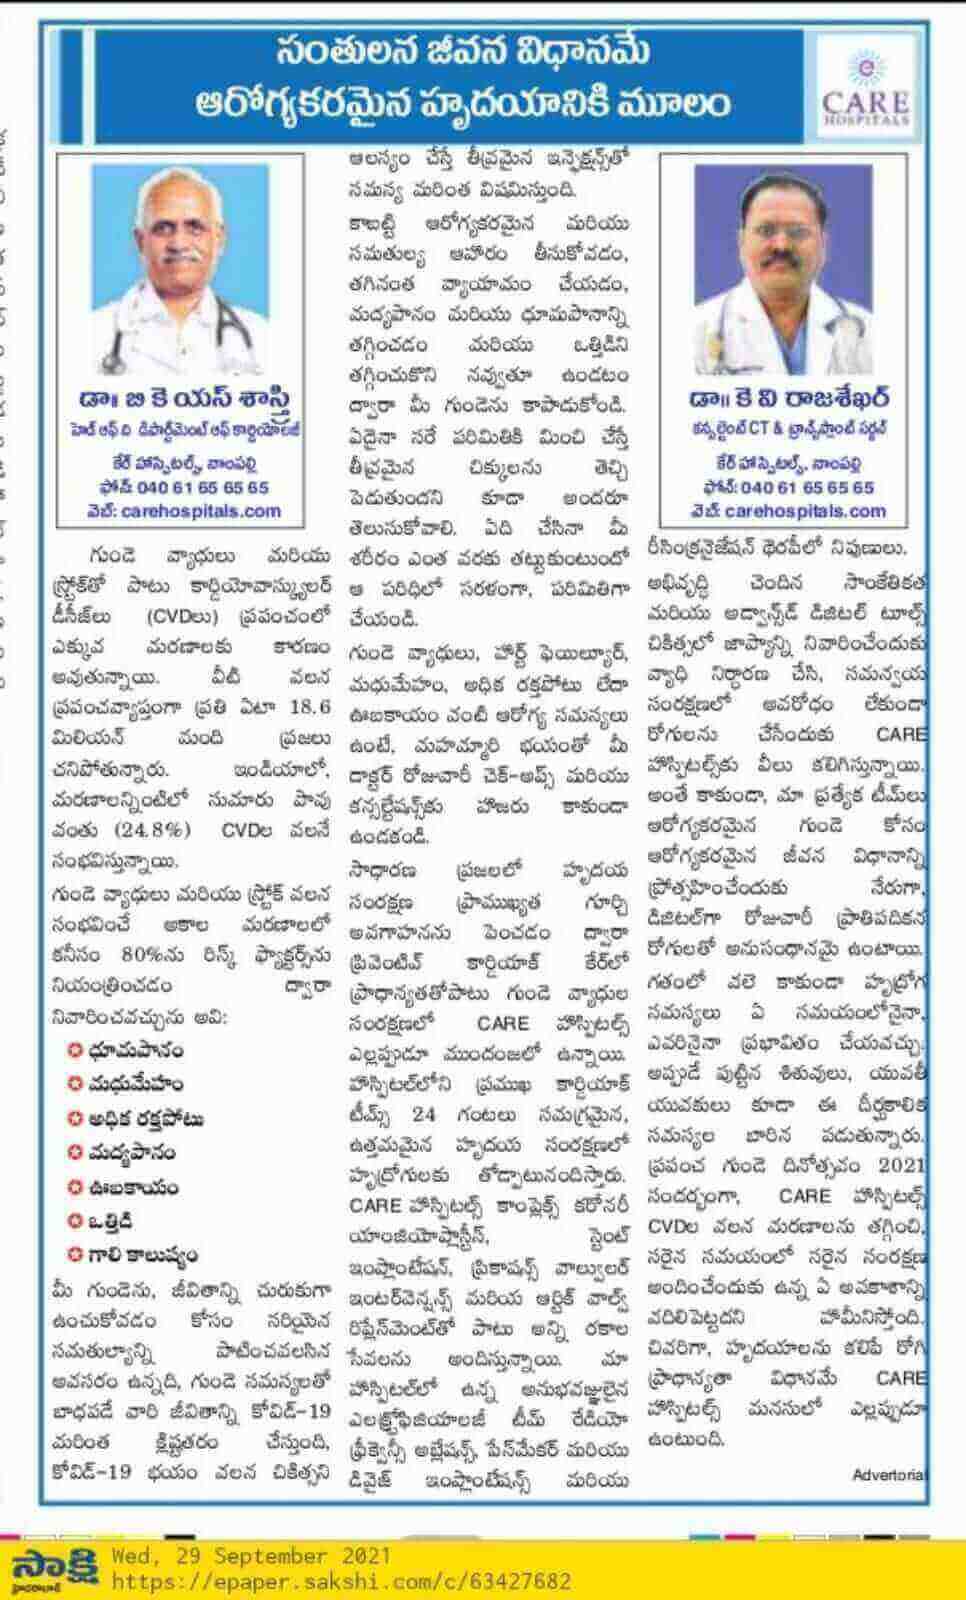 Article on the occasion of World Heart Day by Dr. B K S Sastry and Dr. K.V. Raja Sekhara Rao by Sakshi